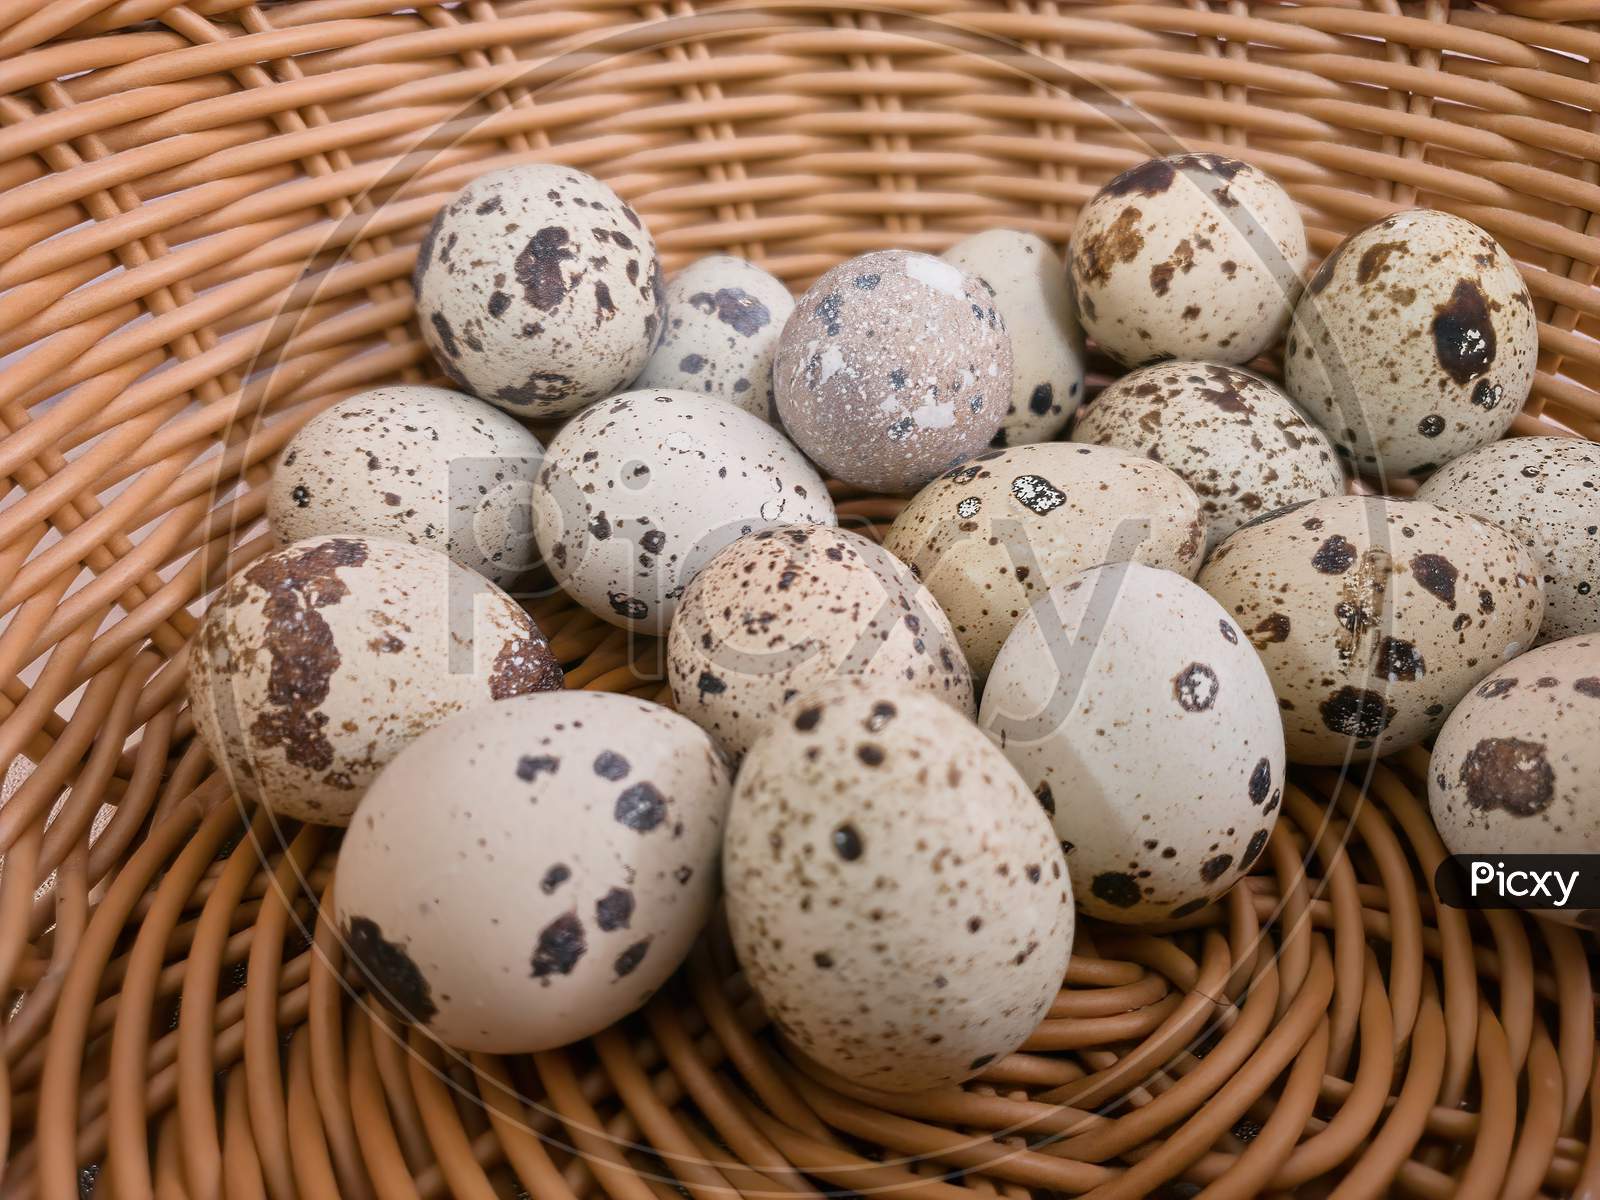 Quail Eggs On Basket, Eco Product. Close-Up View